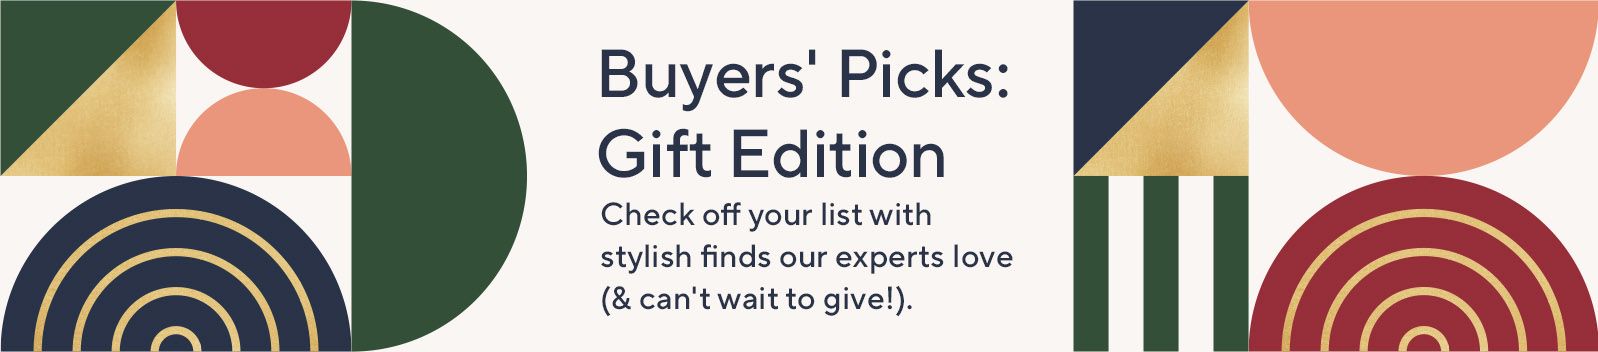 Buyers' Picks: Gift Edition- Check off your list with stylish finds our experts love (& can't wait to give!).